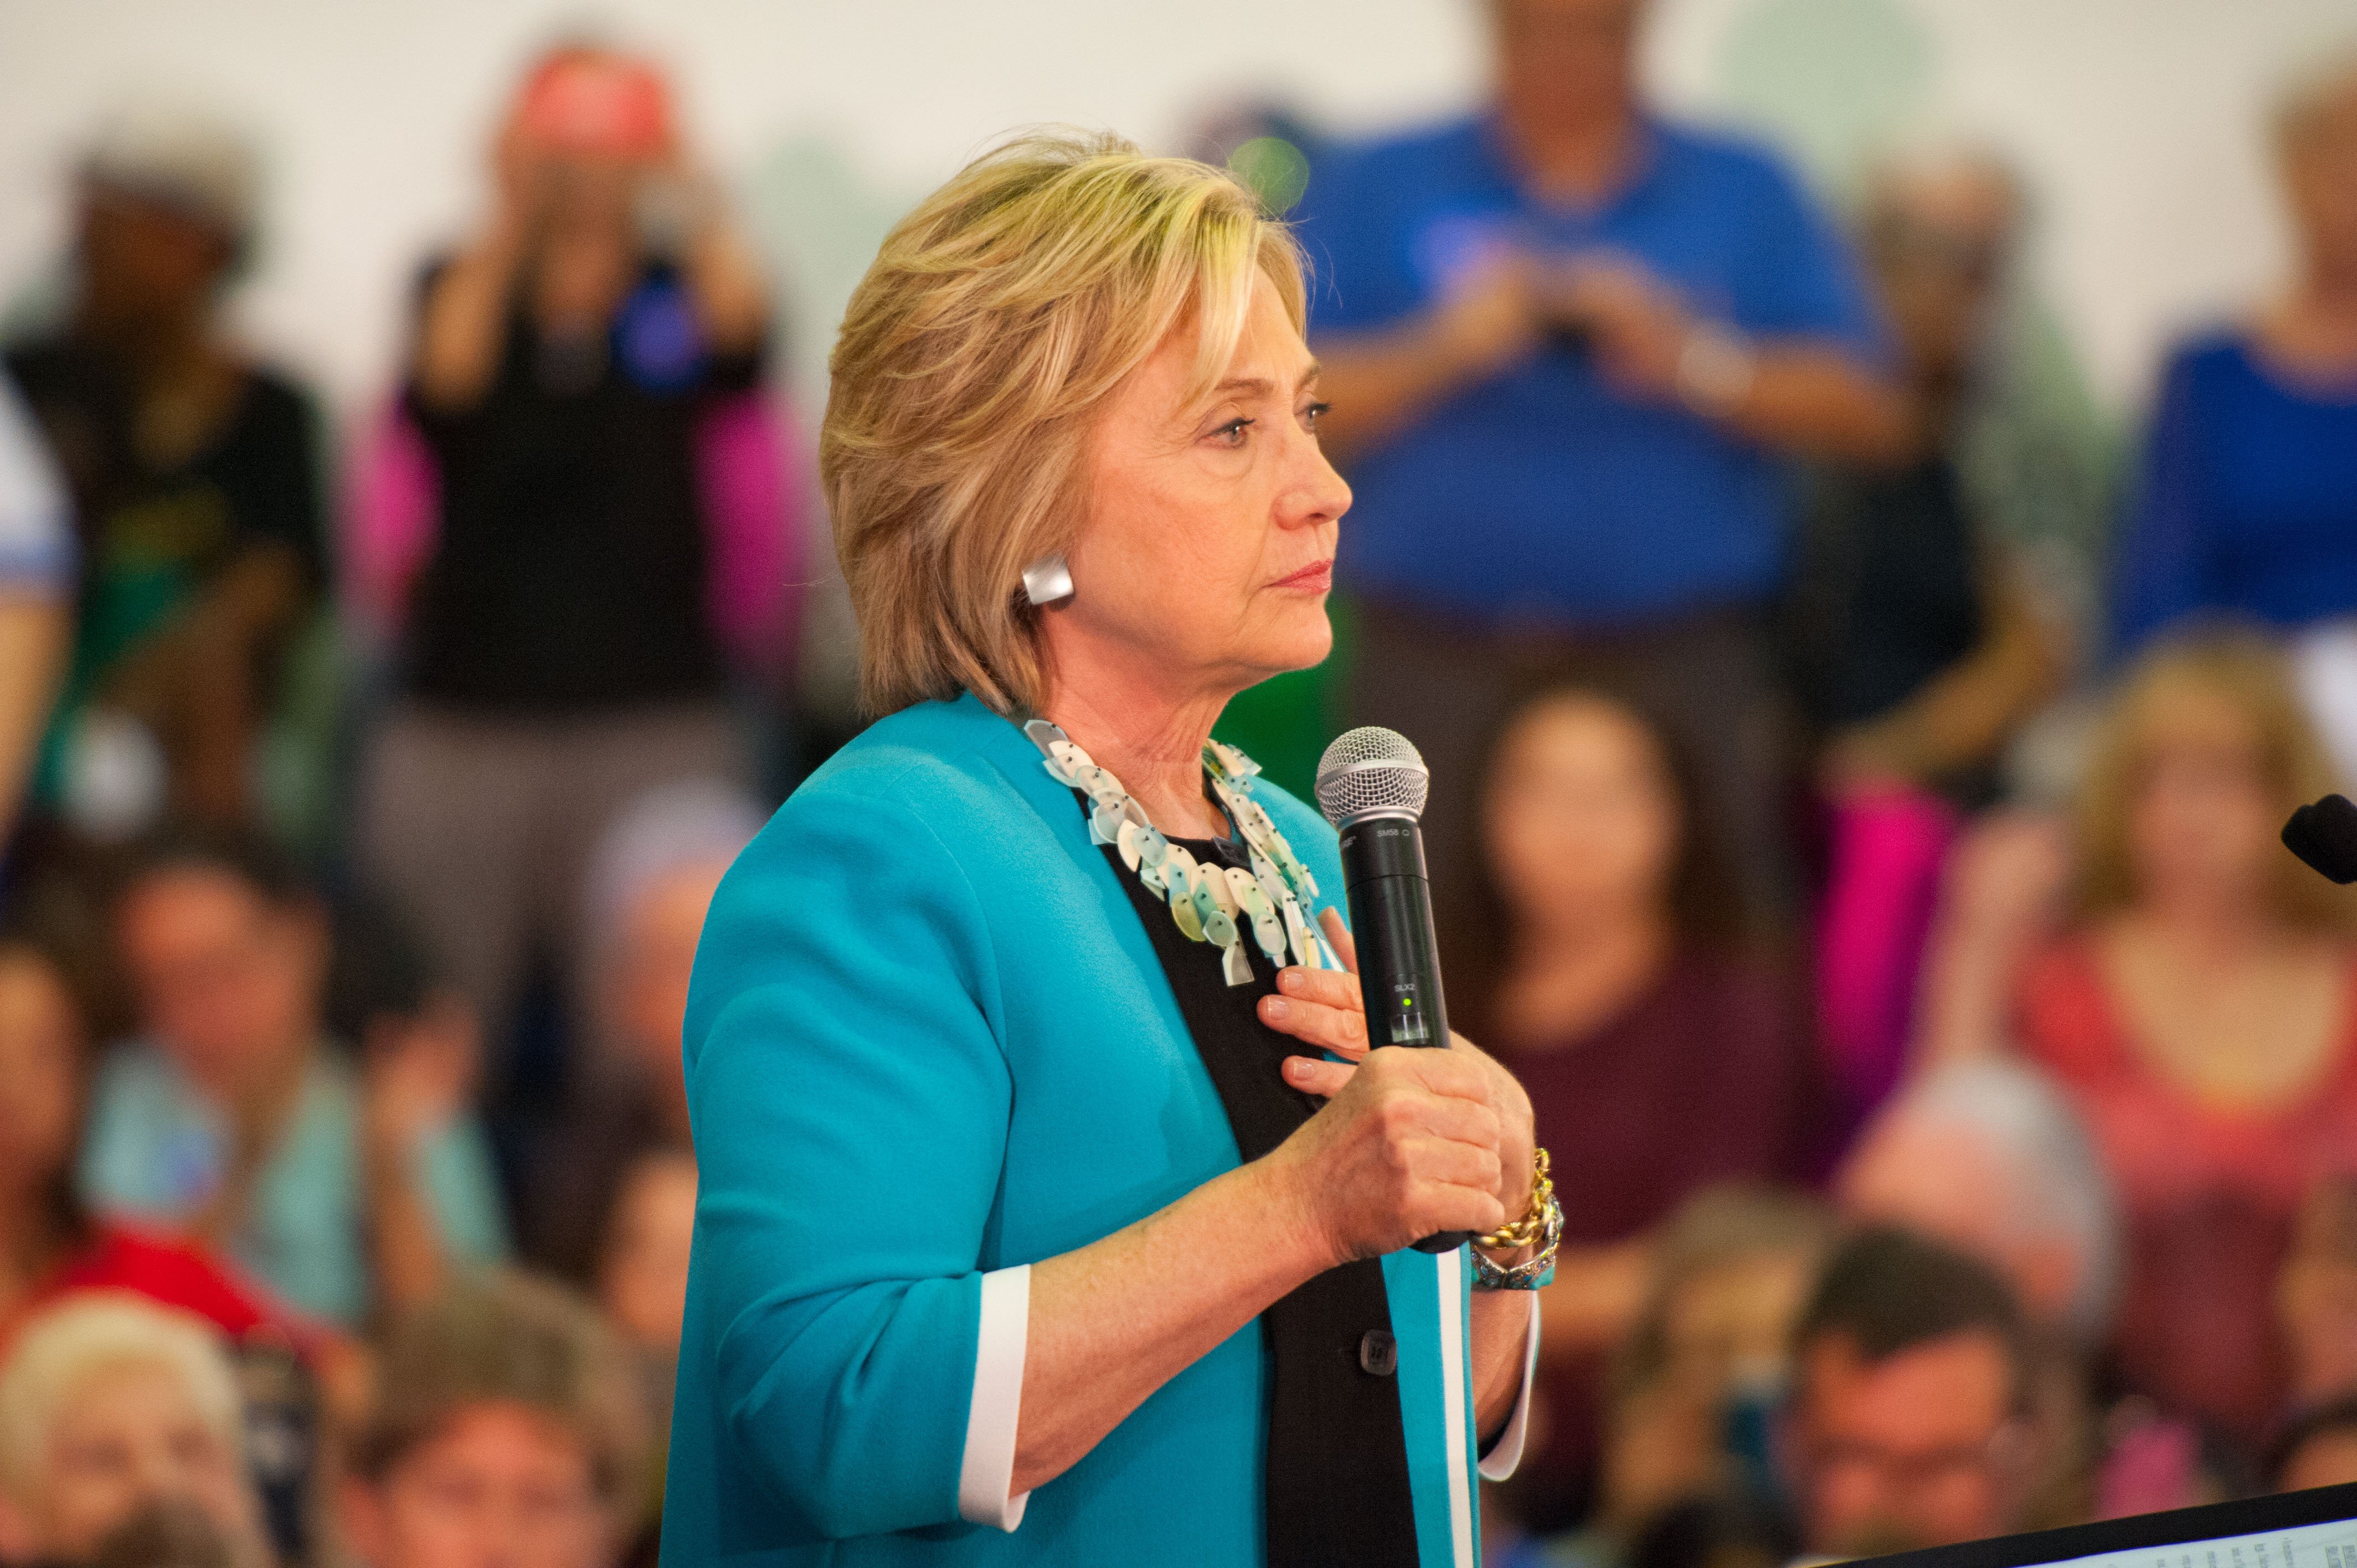 Hillary Clinton For Florida Grassroots Organizing Event